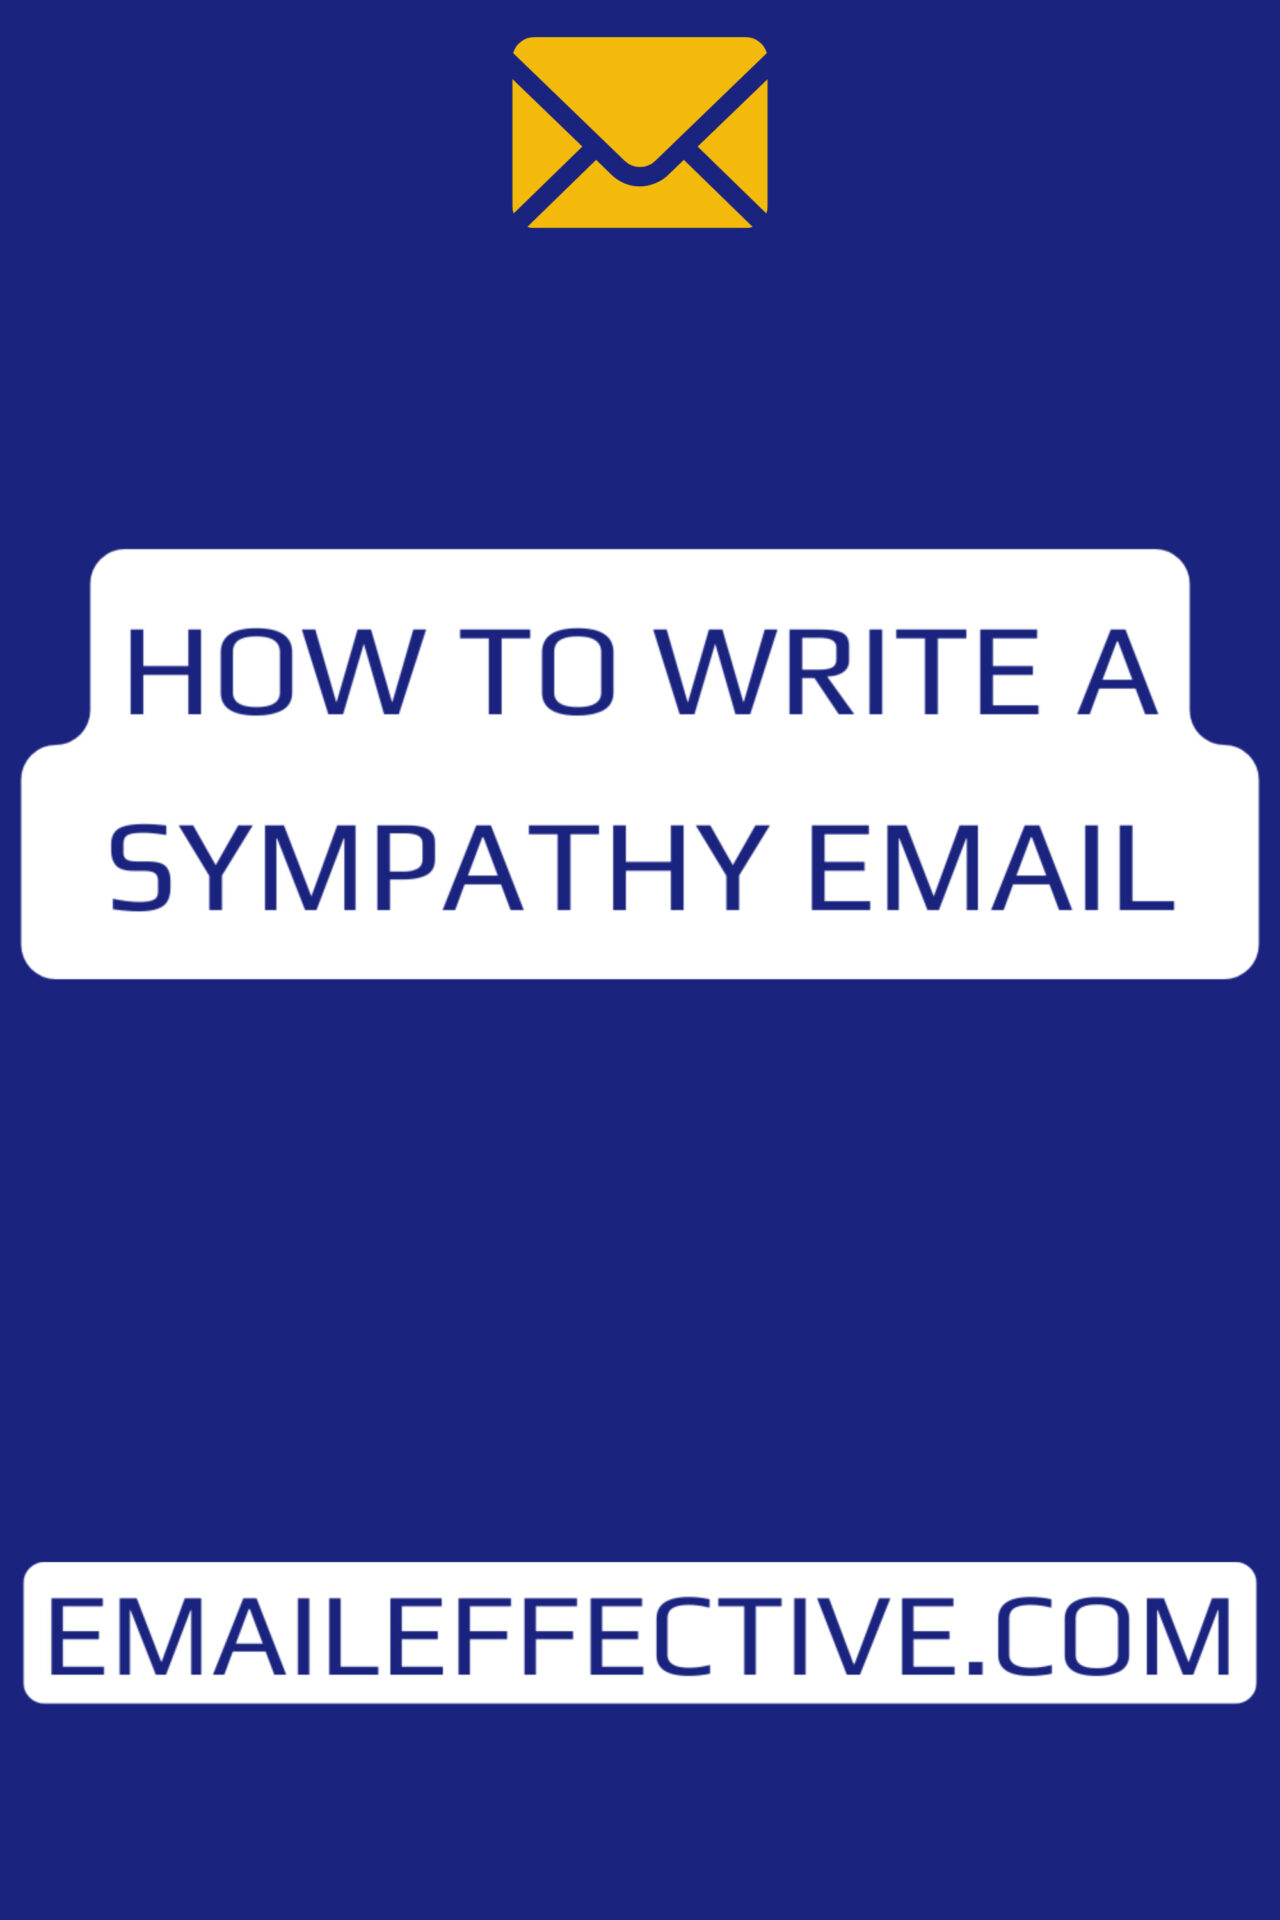 How to Write a Sympathy Email